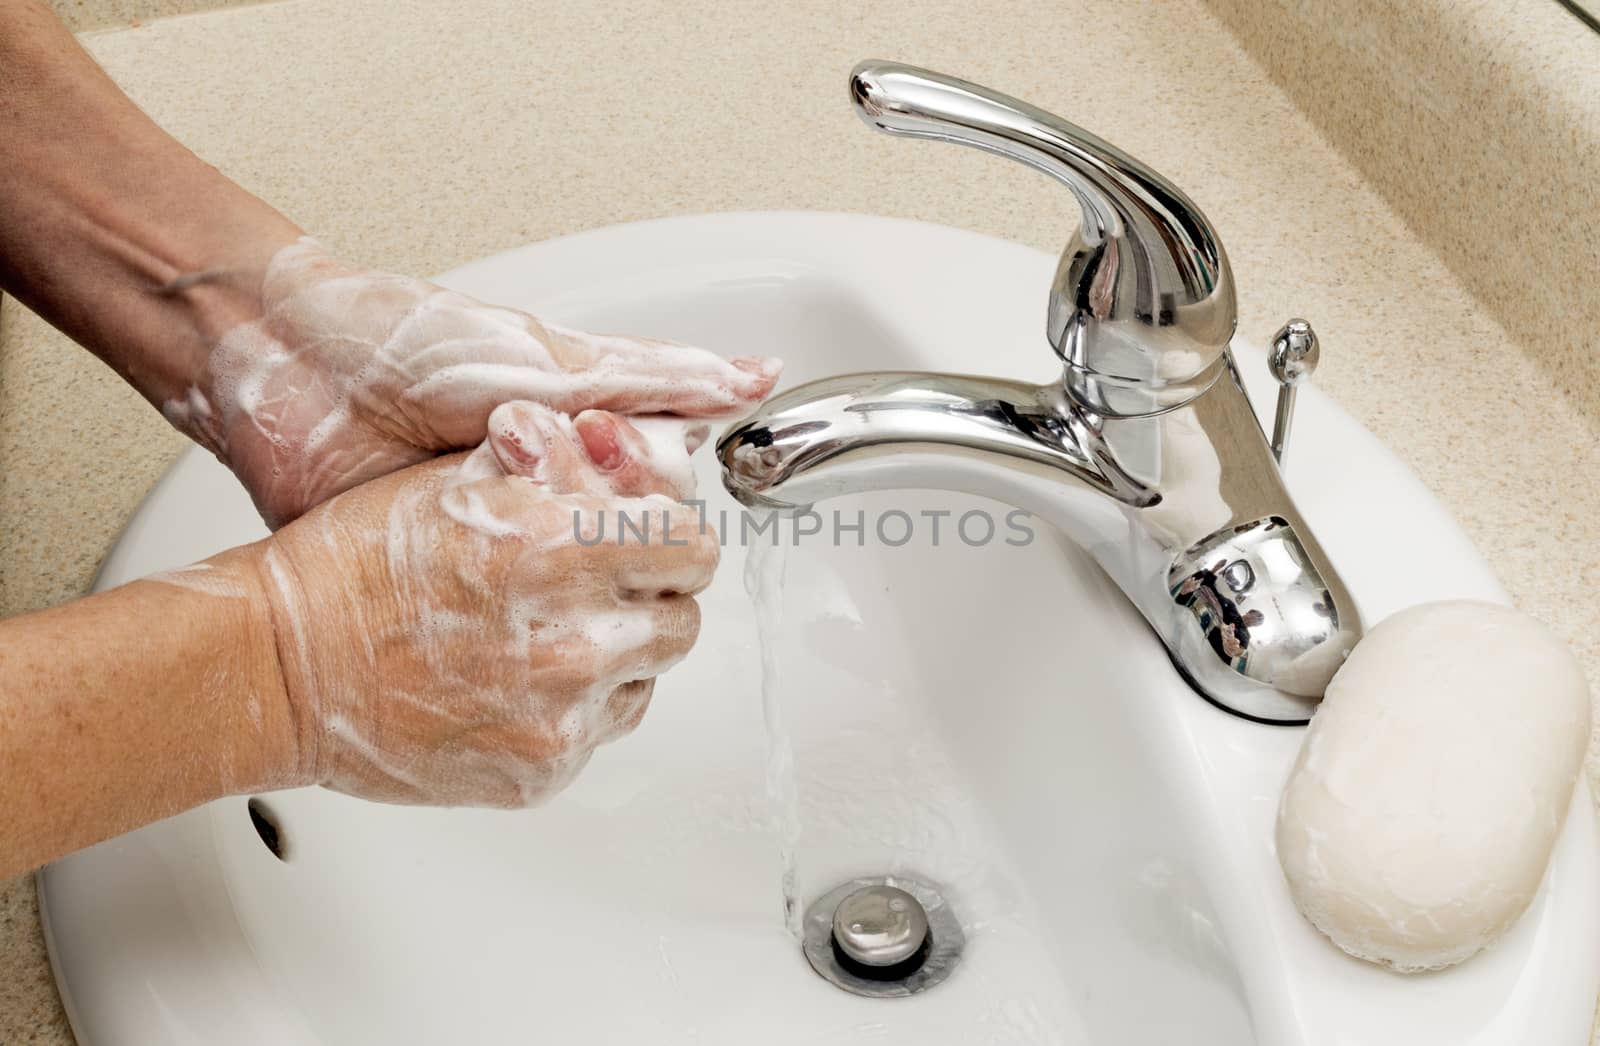 Showing good hygiene, a woman washes her hands.